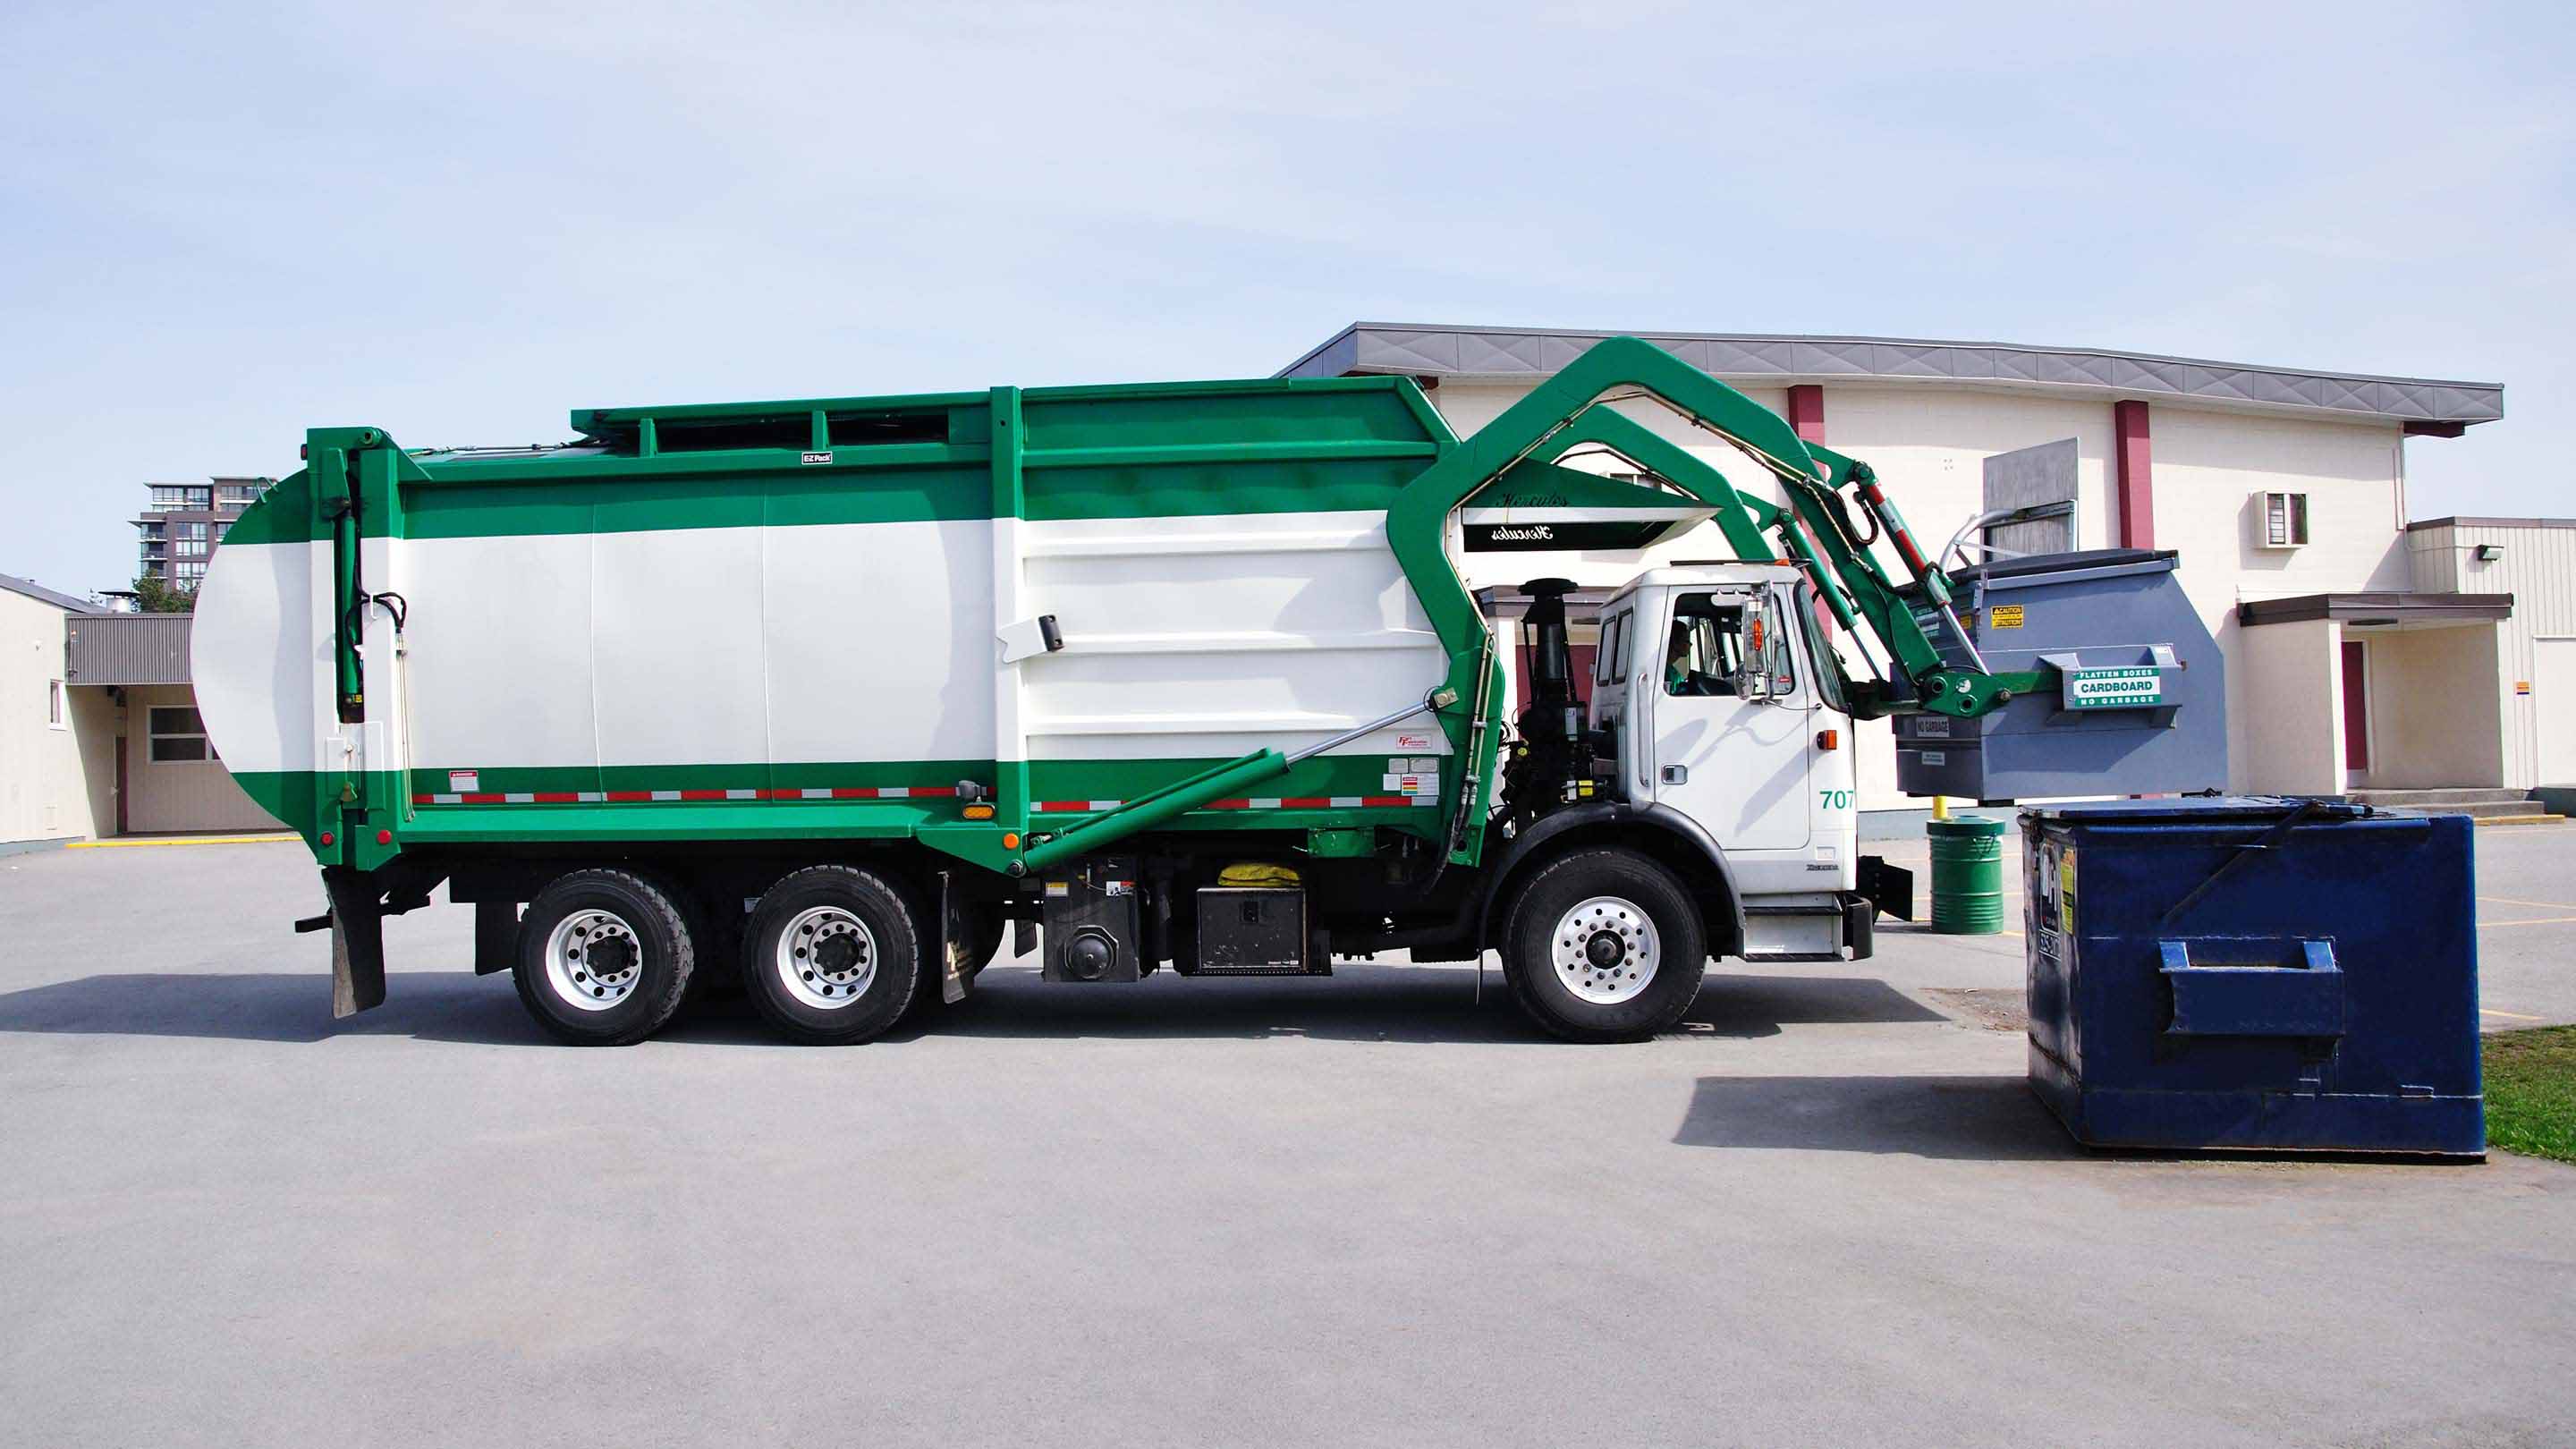 Green and white garbage truck lifting a blue dumpster